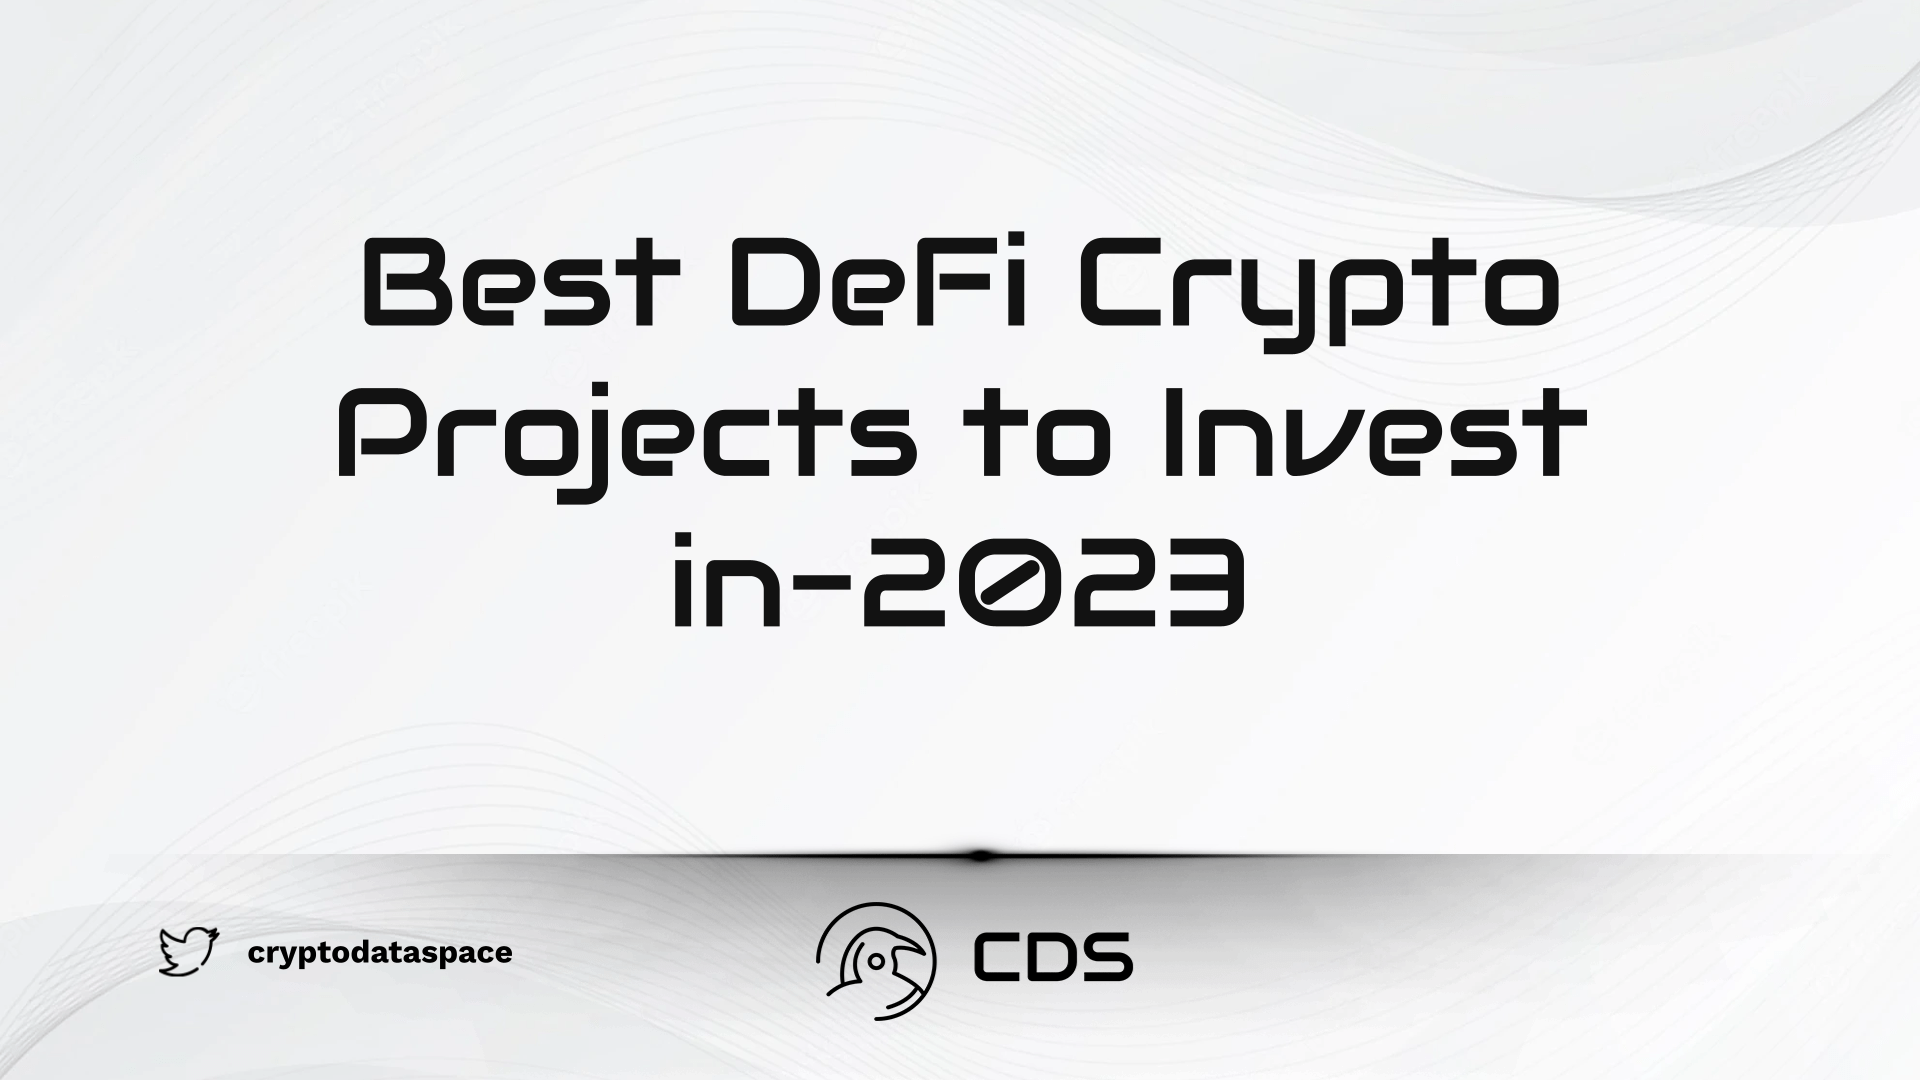 Best DeFi Crypto Projects to Invest-2023